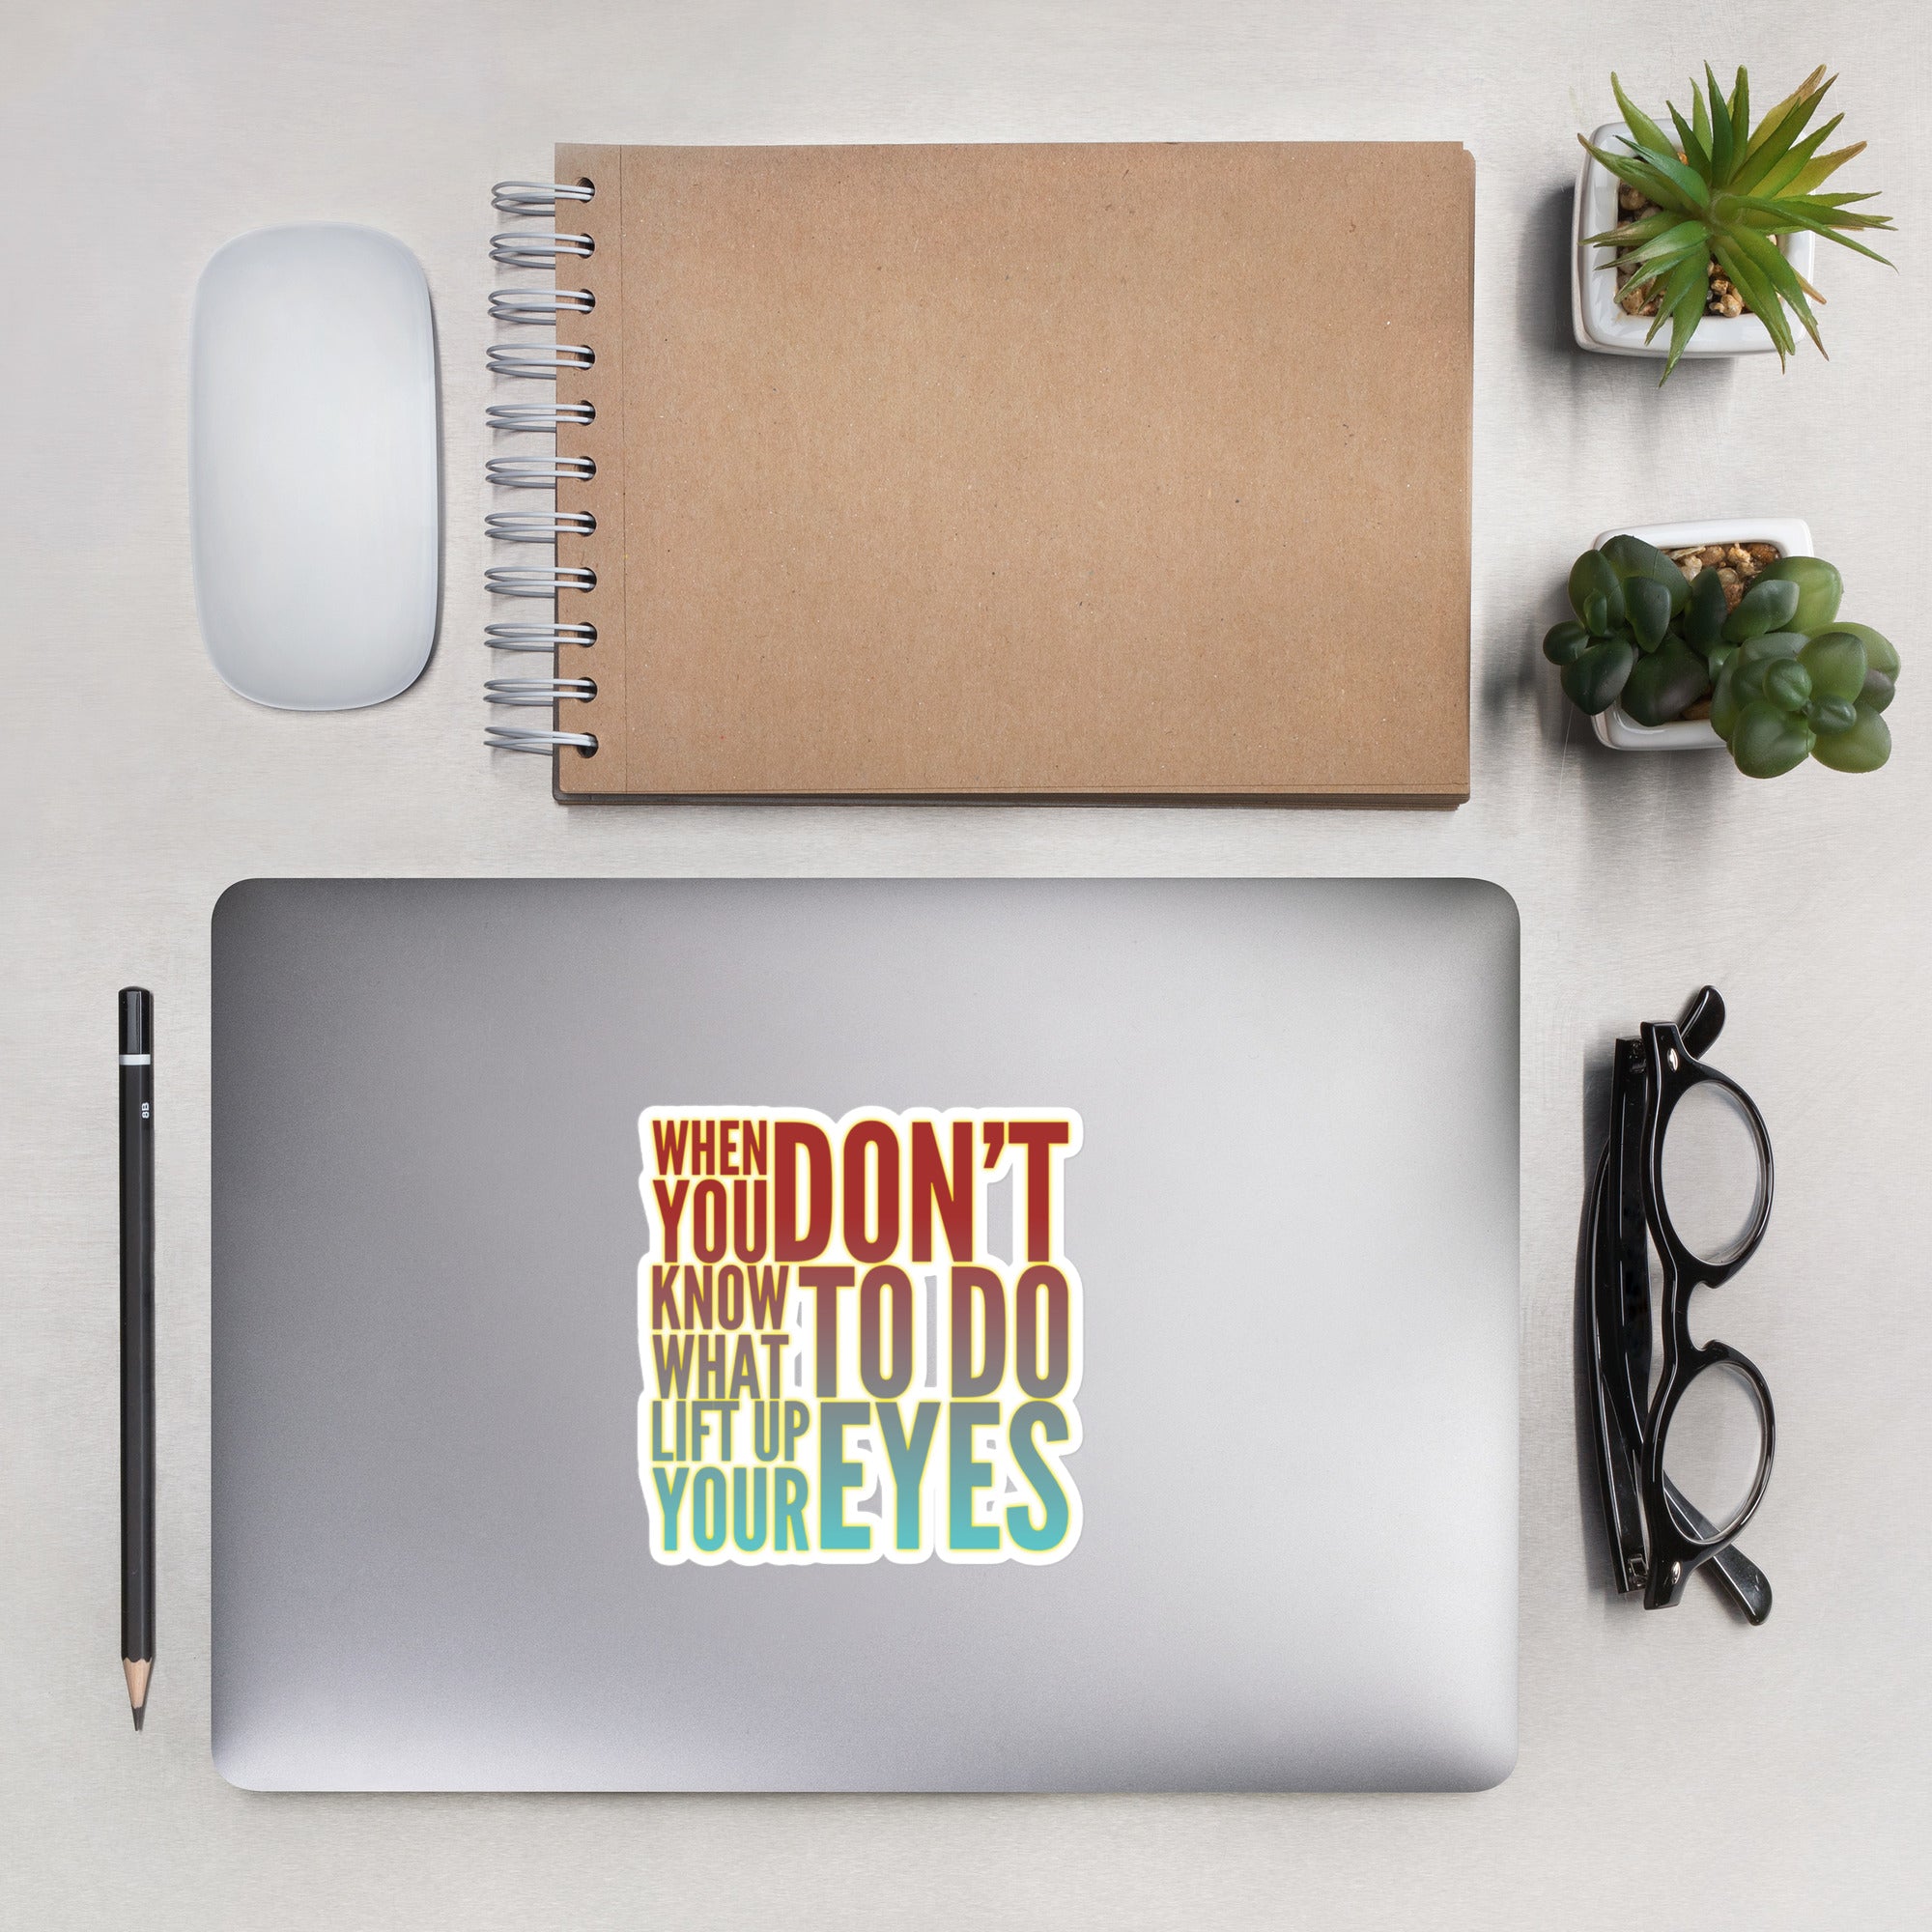 GloWell Designs - Bubble-Free Stickers - Motivational Quote - Lift Up Your Eyes - GloWell Designs